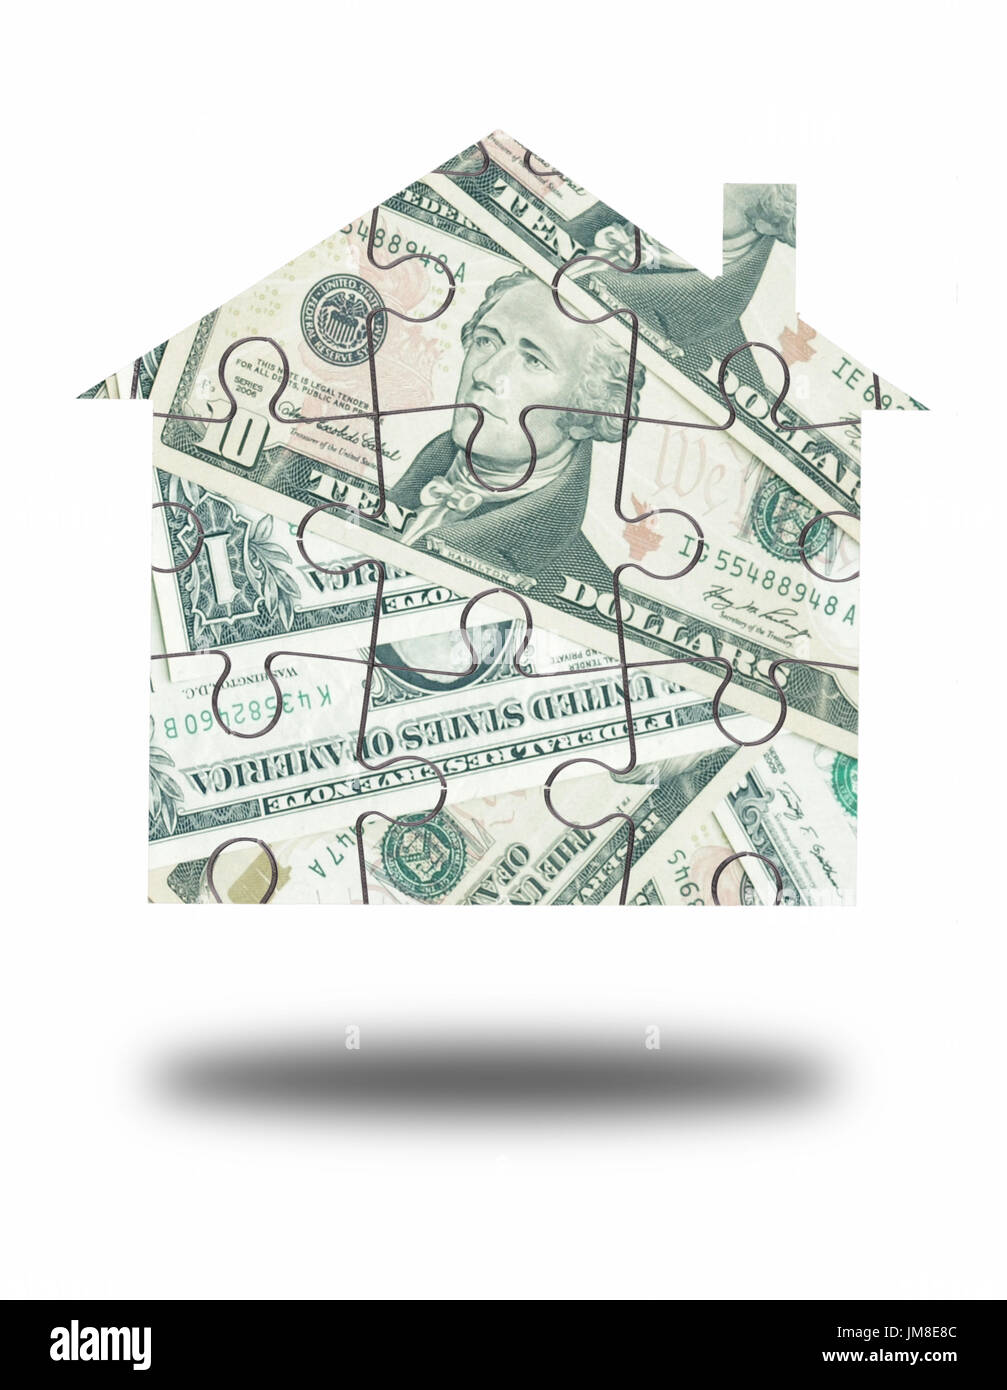 Dollar house jigsaw puzzle over a white background Stock Photo